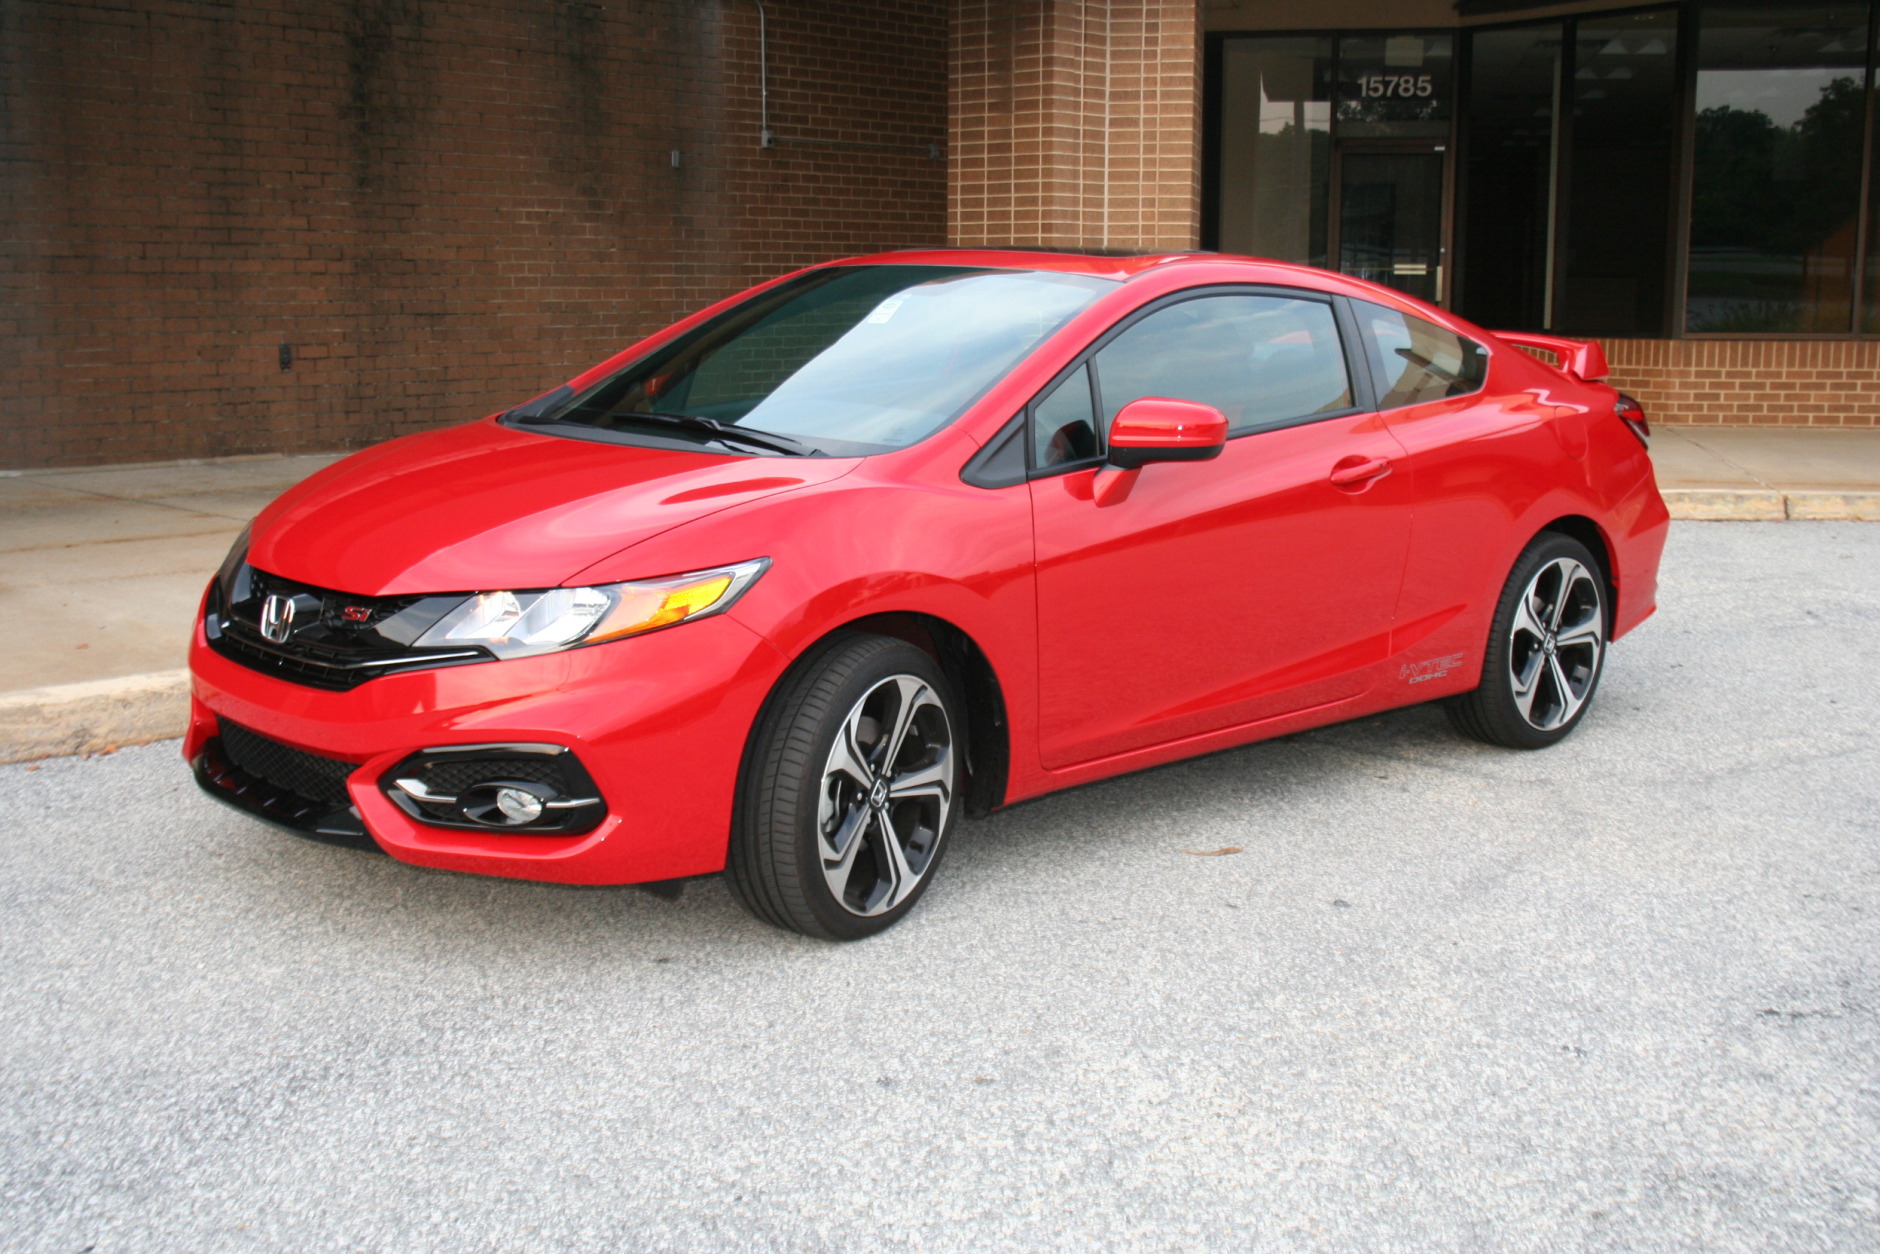 Car Report 2014 Honda Civic Si Coupe Is Fun To Drive With A Rare